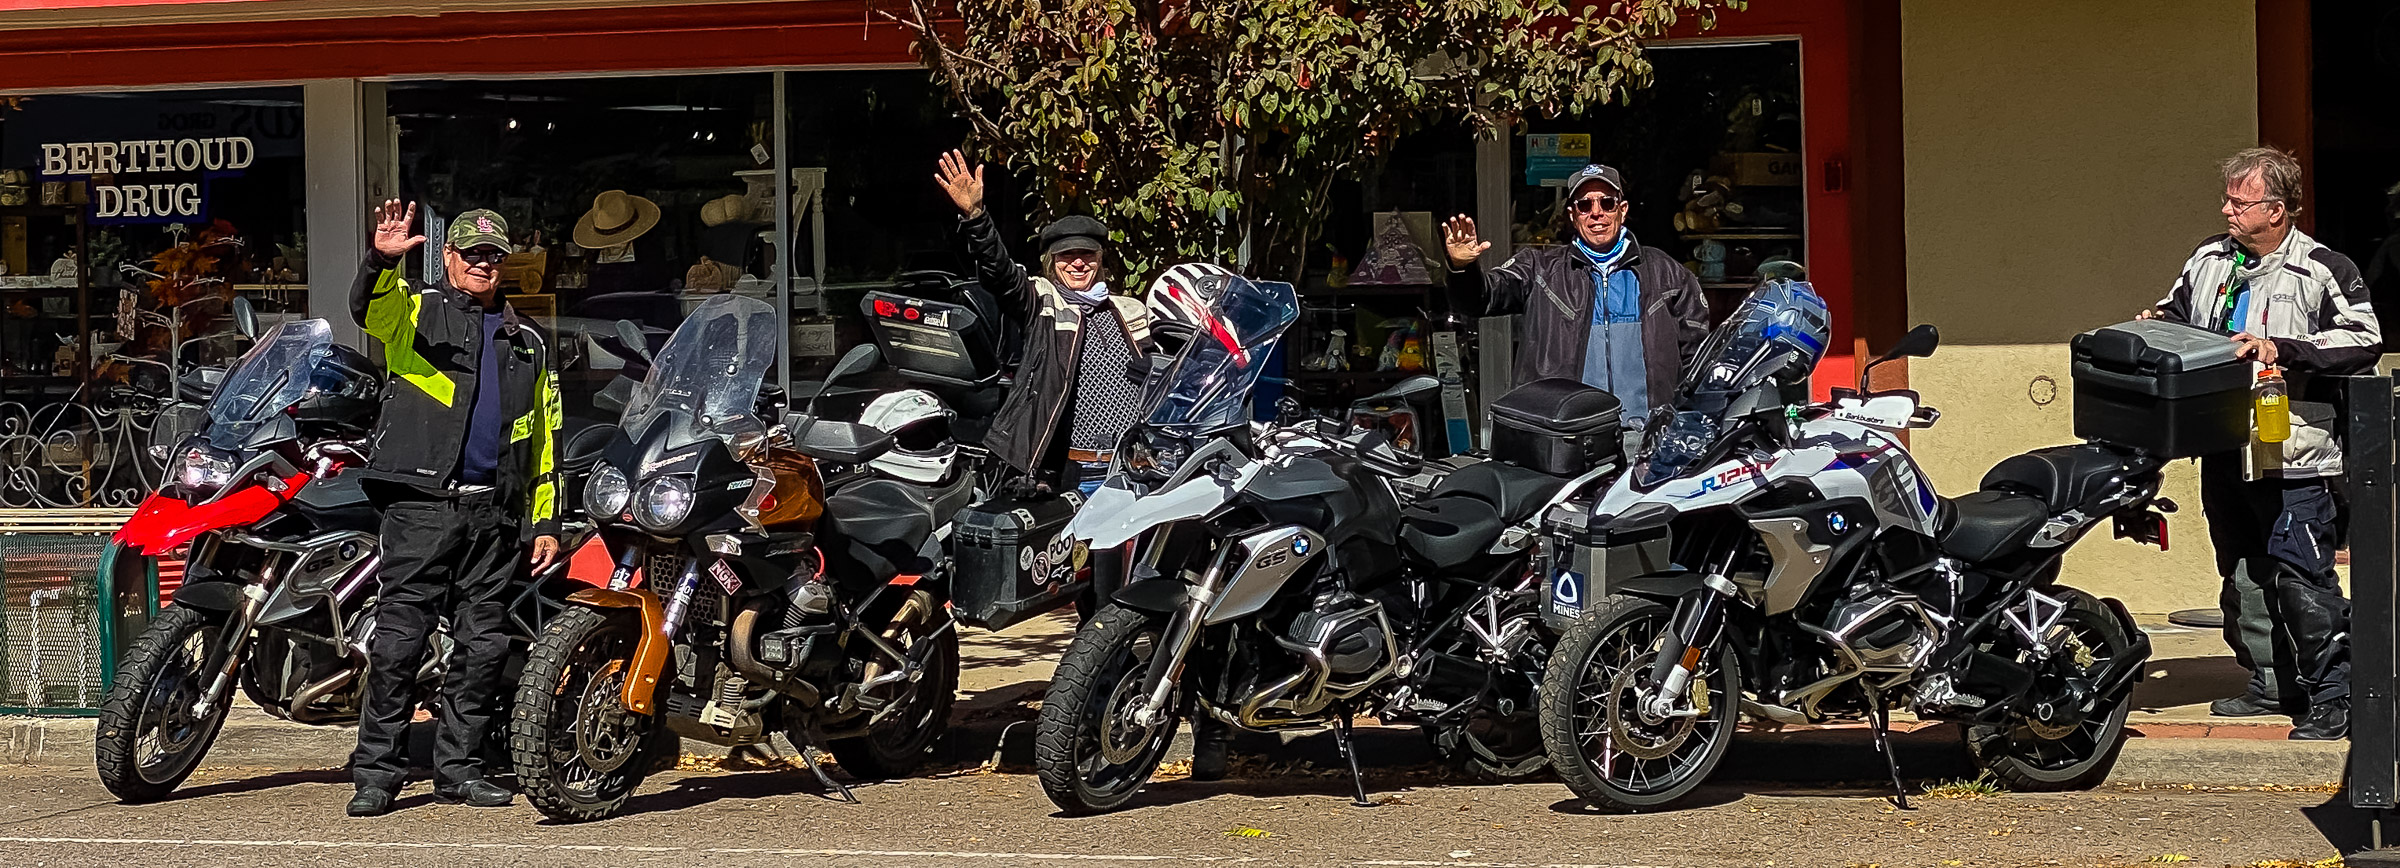 We had 7 riders from the north. Met at Vern‘s, did the twisties on Buckhorn Road, then looped by Carter Lake on our way to Berthoud.